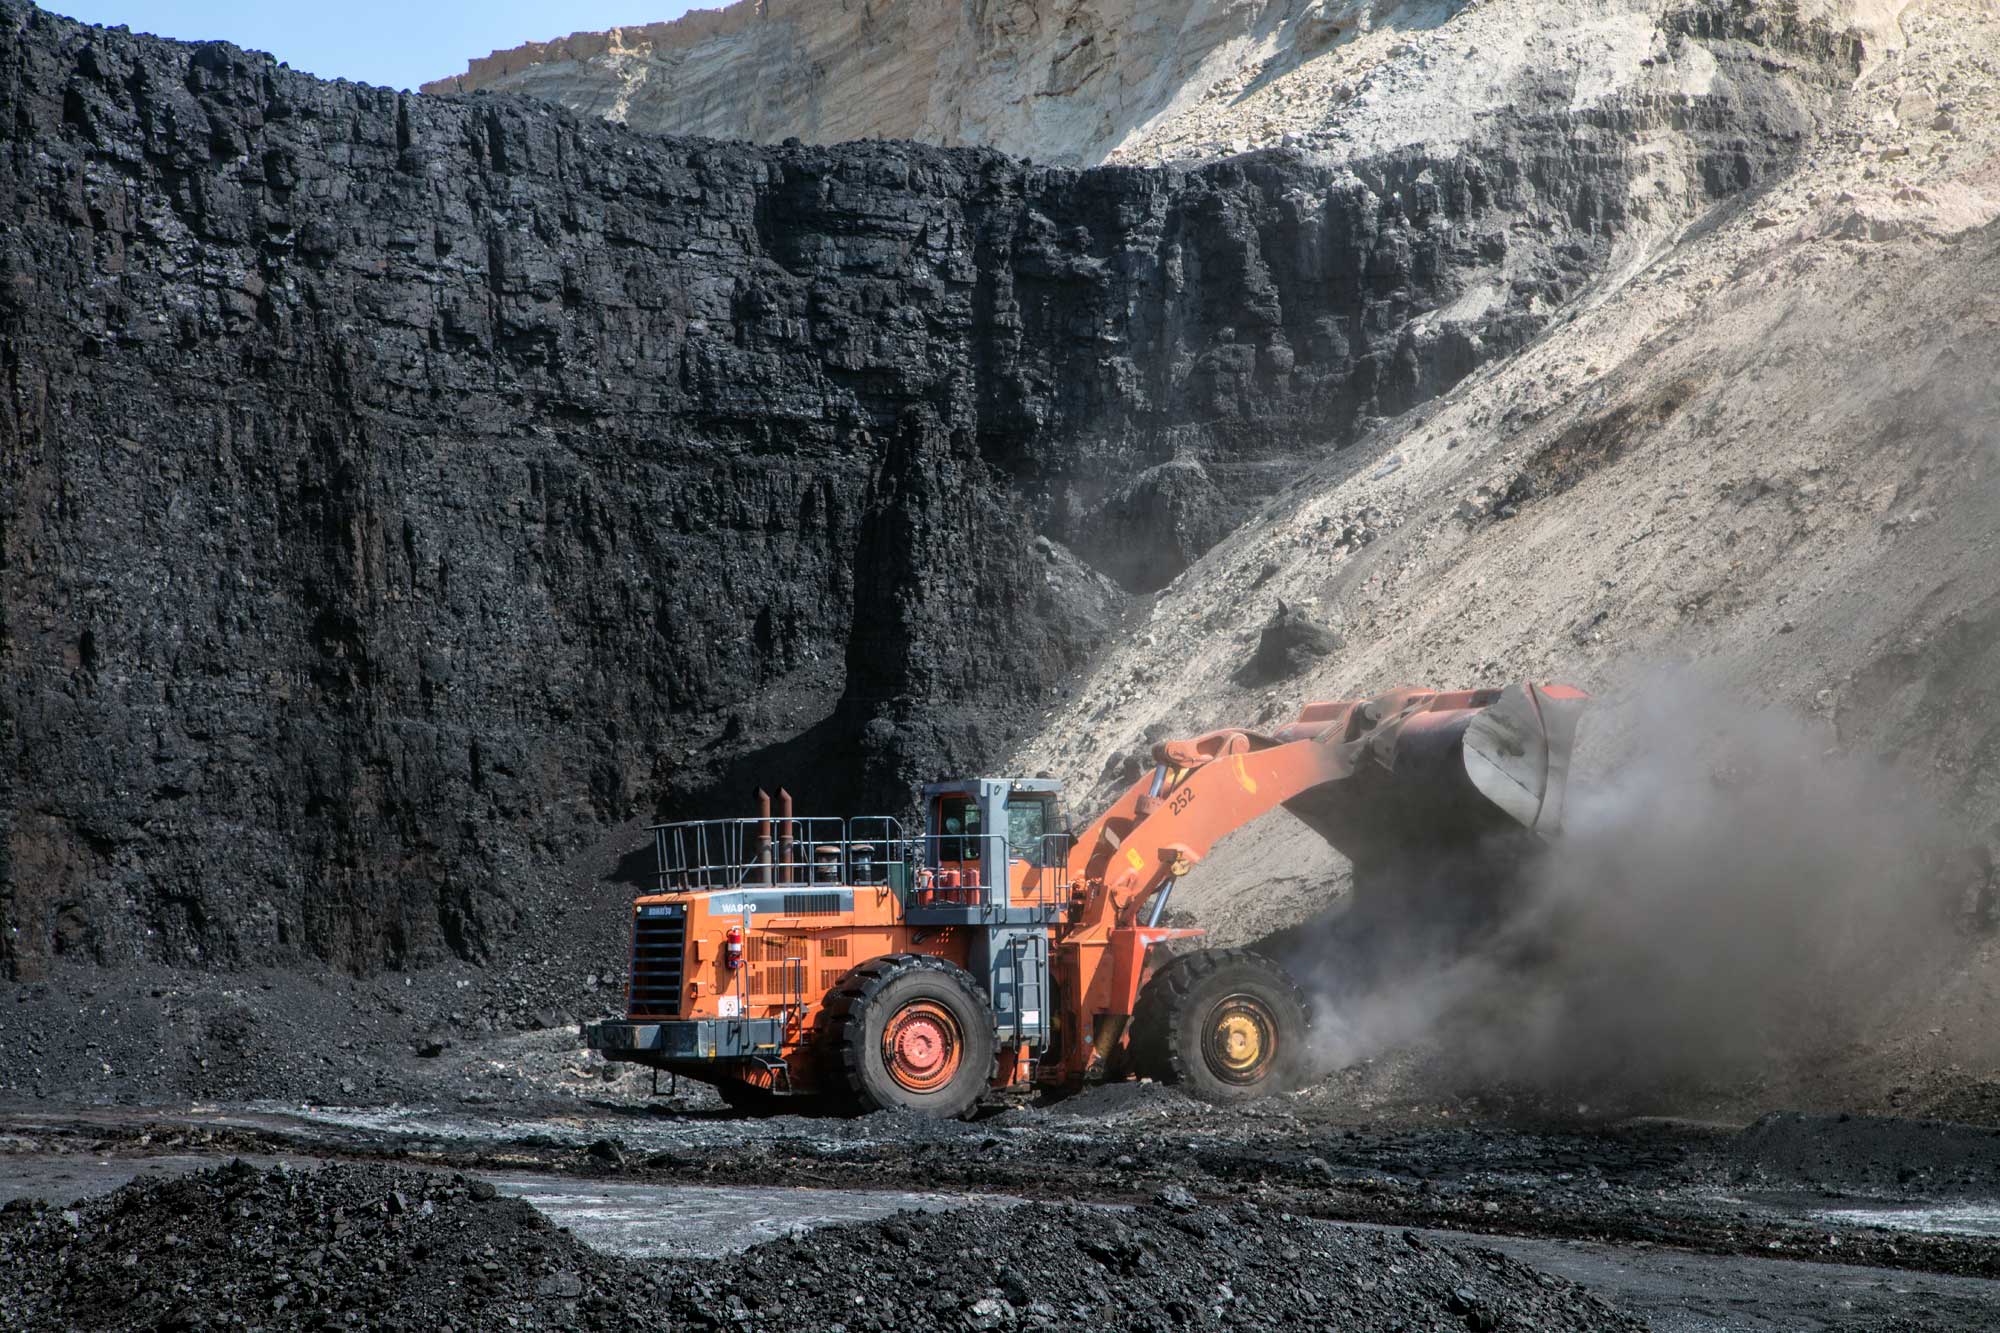 Photograph of a front-end loader at work in a coal mine. The photo shows a vehicle with a shovel attached to the front. The machine appears to be dropping a load of rock onto a pile. Next to the pile and behind the front-end loader, a thick, vertical wall of coal can be seen. The wall of coal is much taller than the machine.